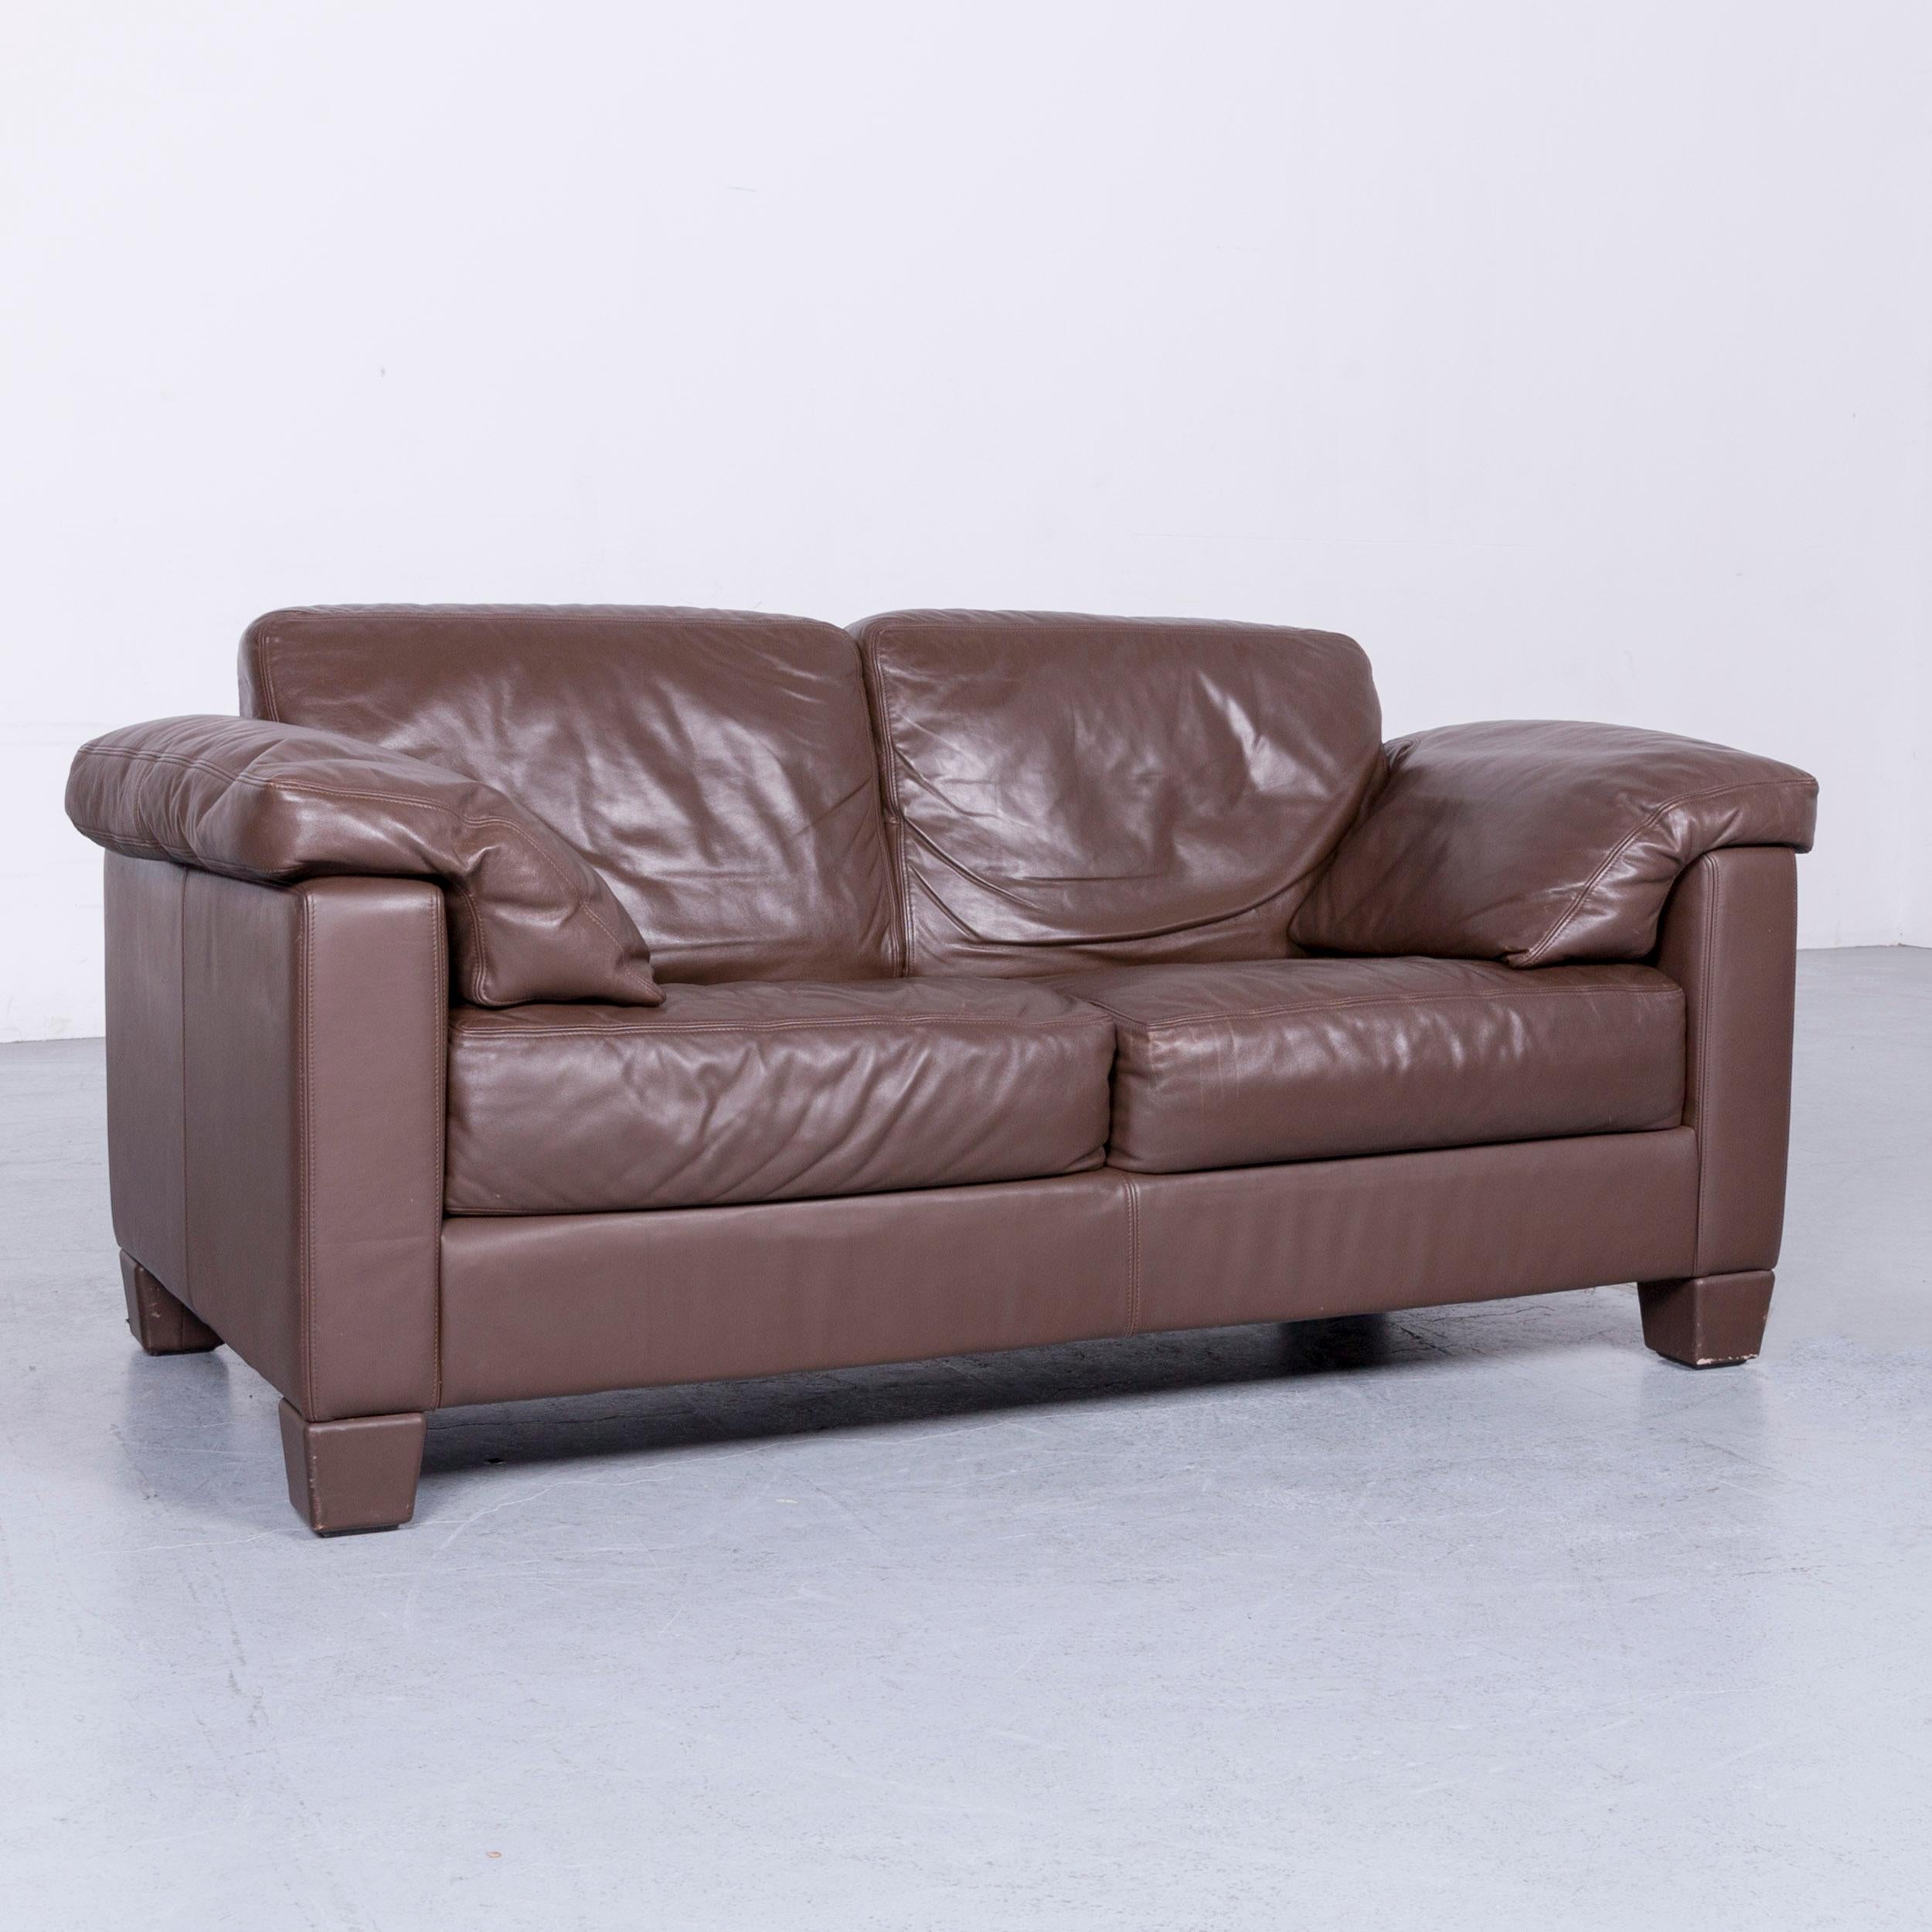 We bring to you an De Sede DS 17 designer leather sofa brown two-seat couch.